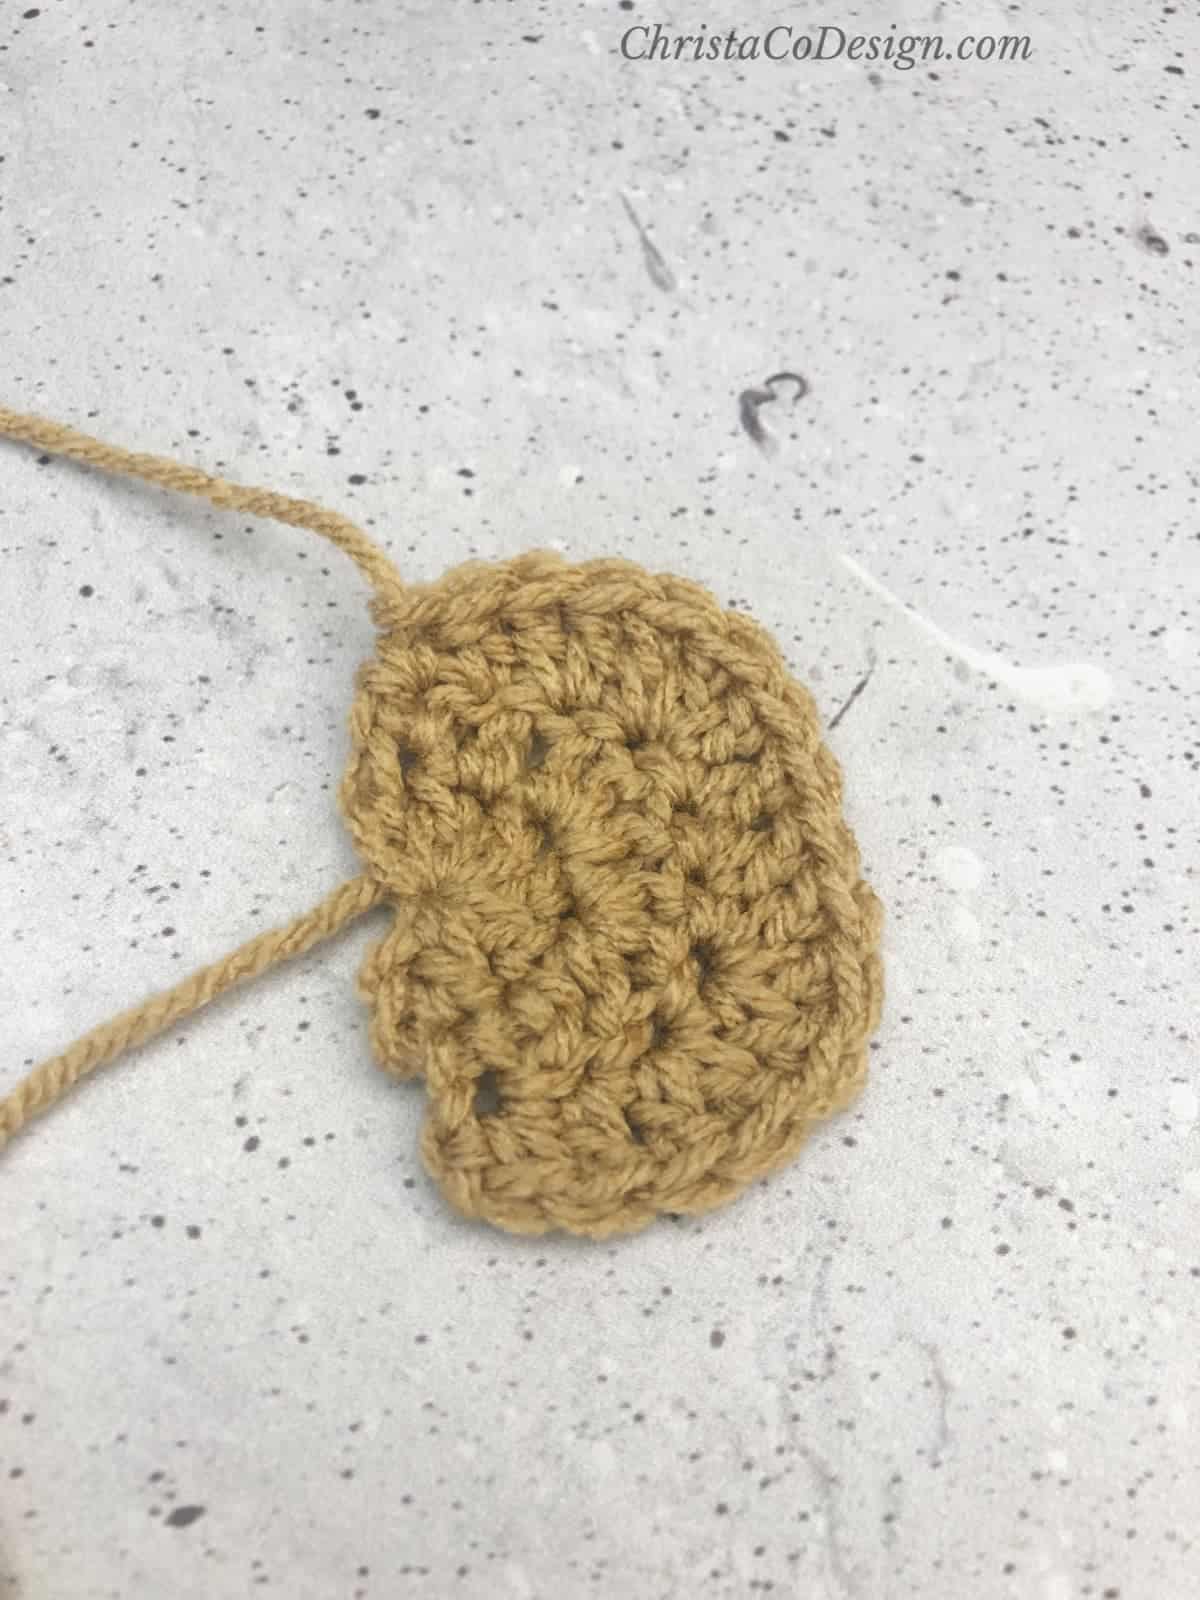 Third round of crochet ear for bear hat.